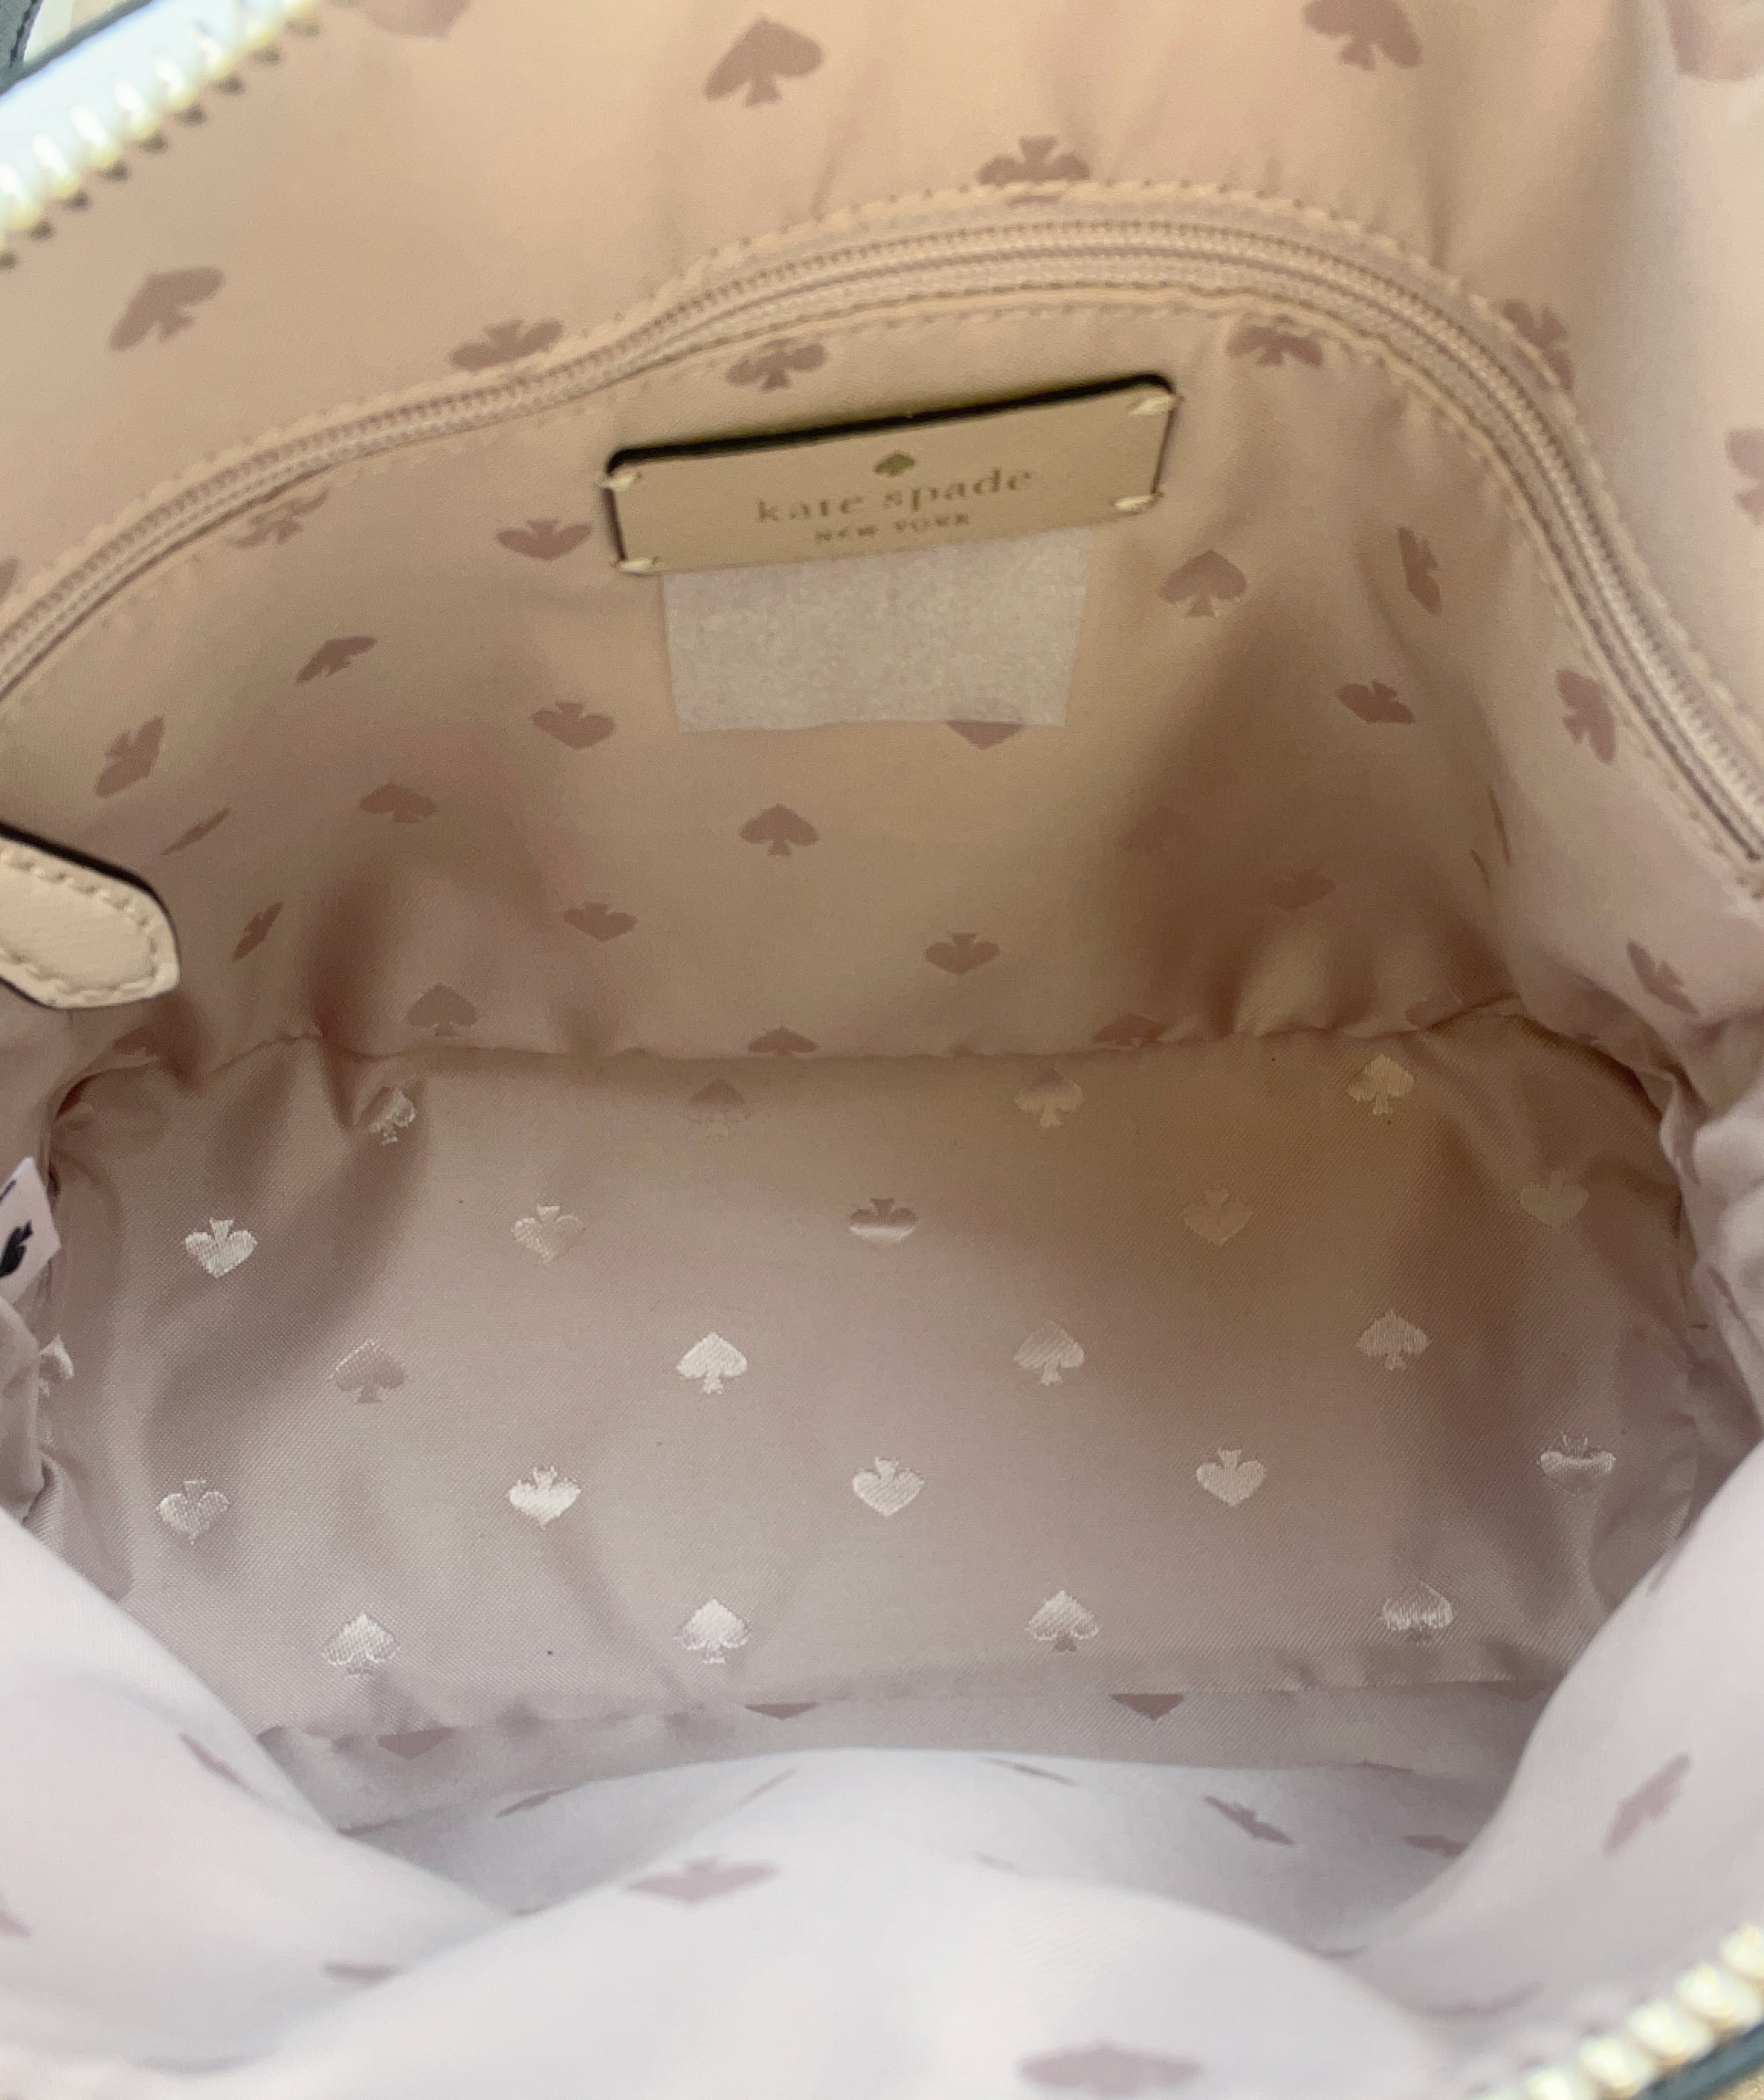 Brand New Kate Spade Staci Dome Crossbody Only 1 Left 